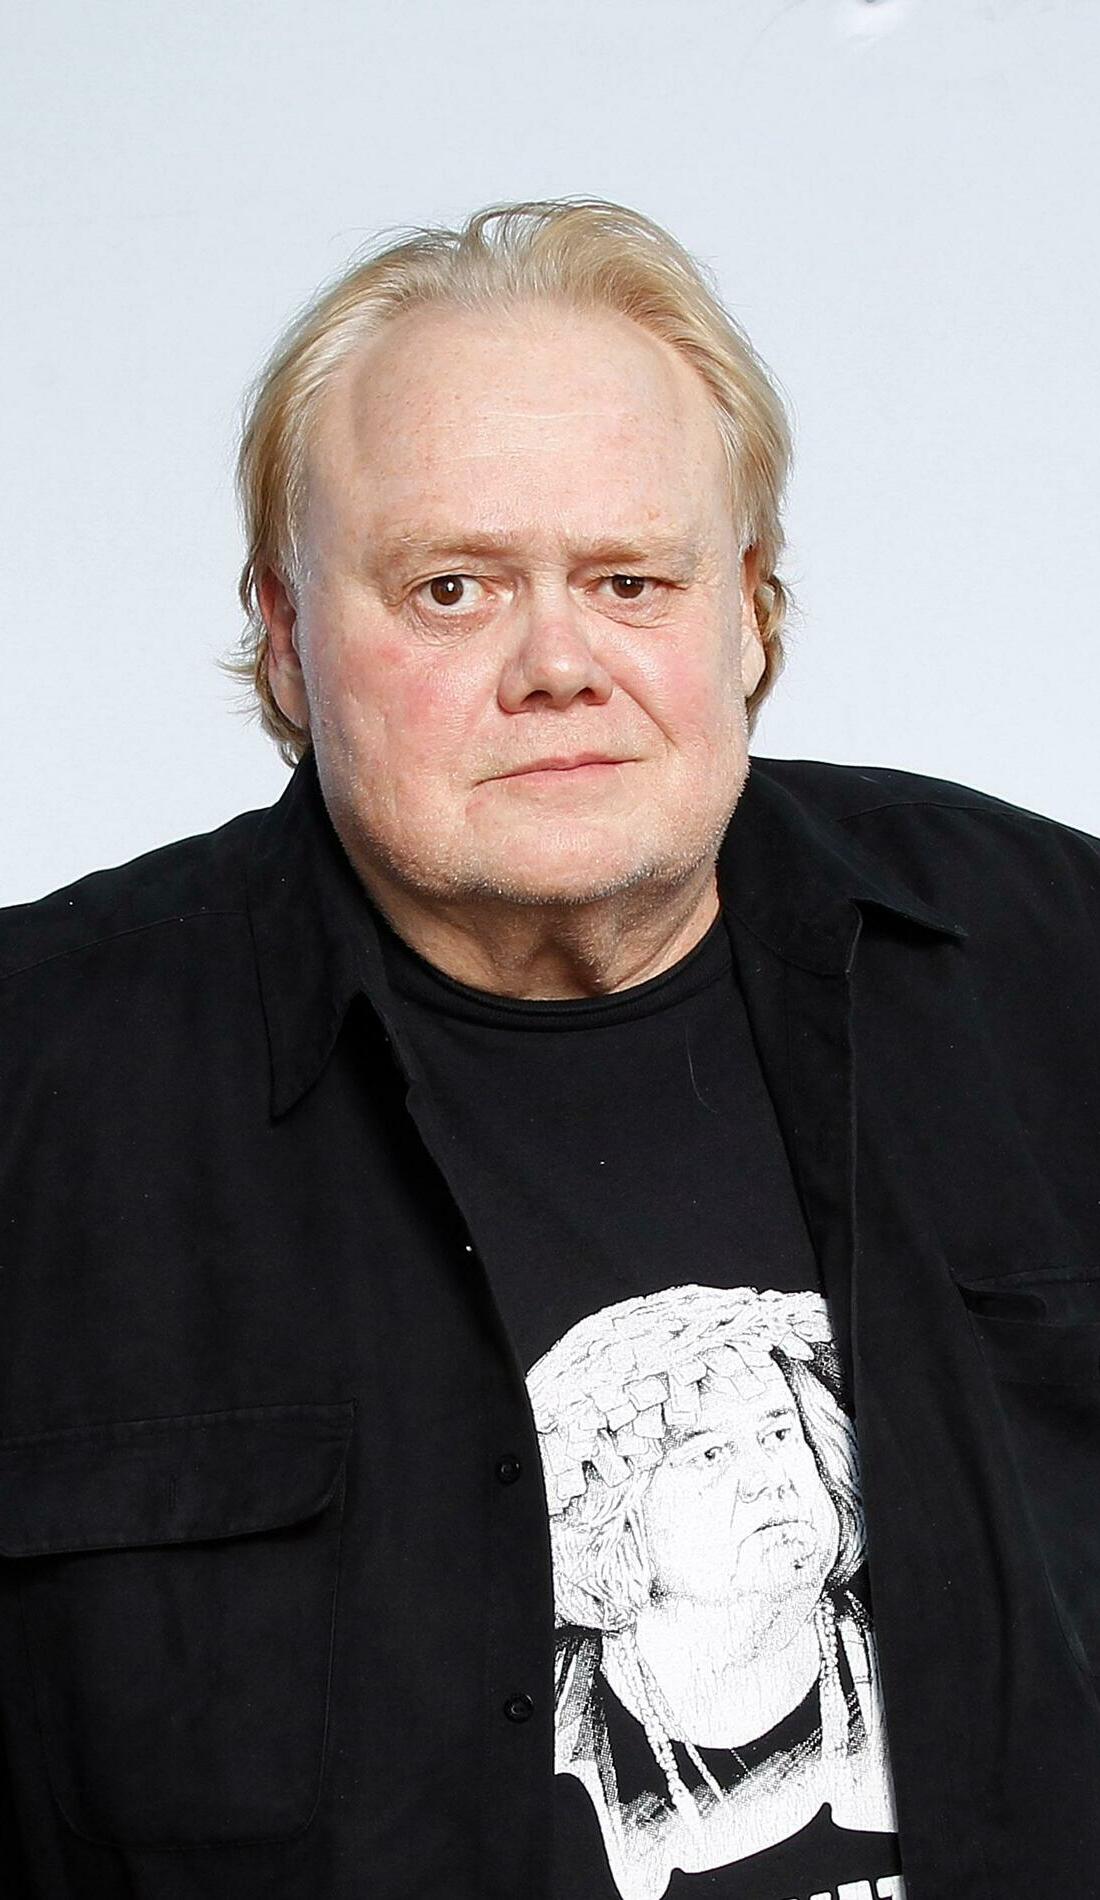 A Louie Anderson live event